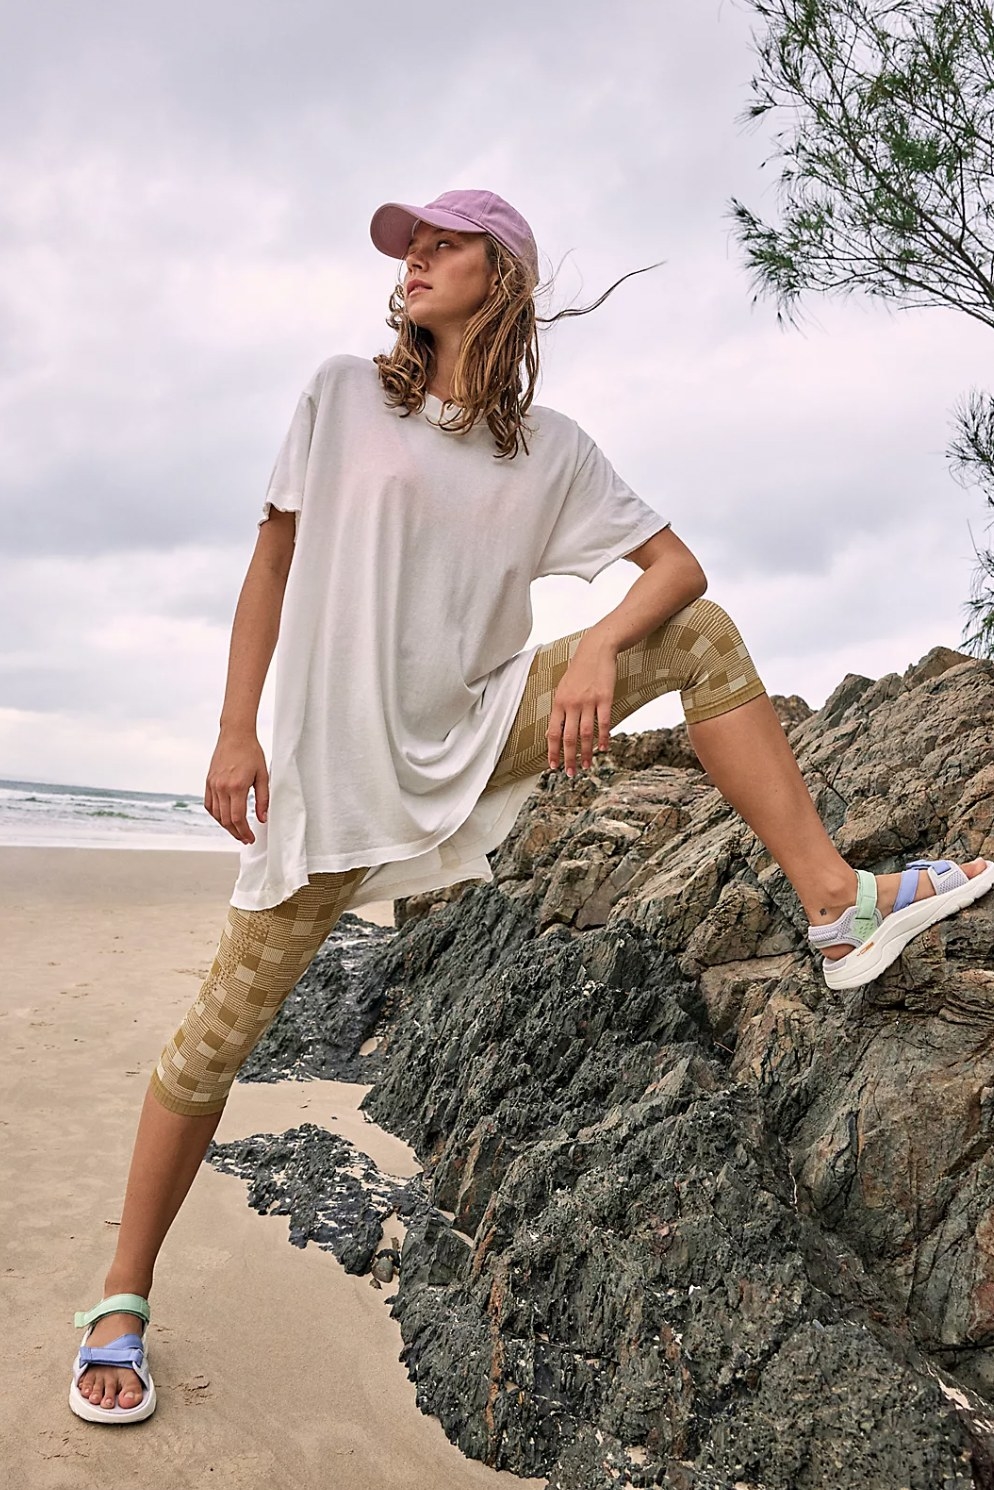 Model with leg on beach rock wearing oversized white tee with cropped leggings and sandals